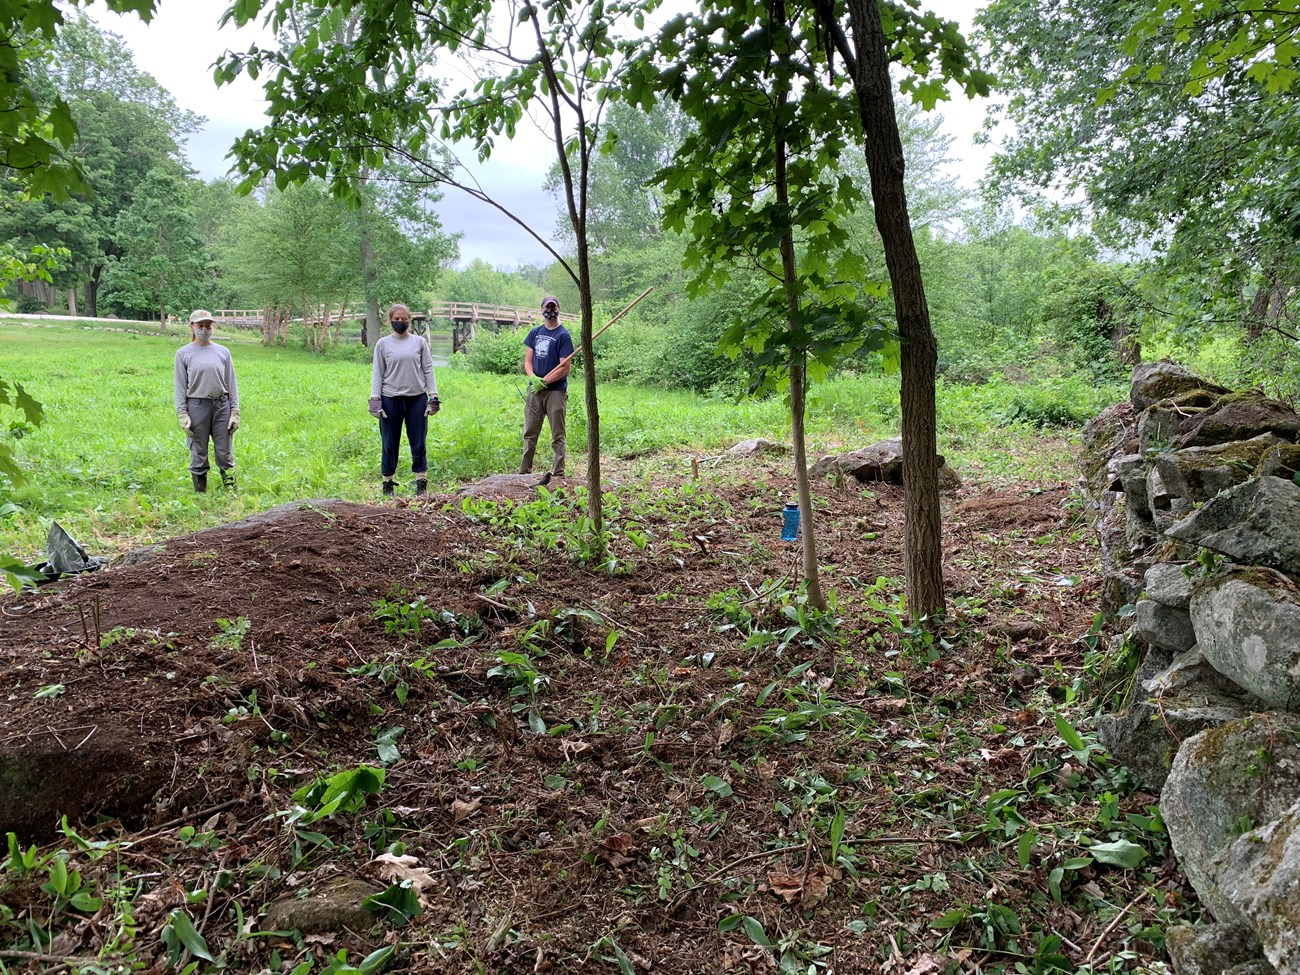 Three workers, two women and a man, stand apart from a stone wall and from each other. They are wearing cloth face masks. Behind them is a grassy field bordered by forest. A bridge is in the distance.